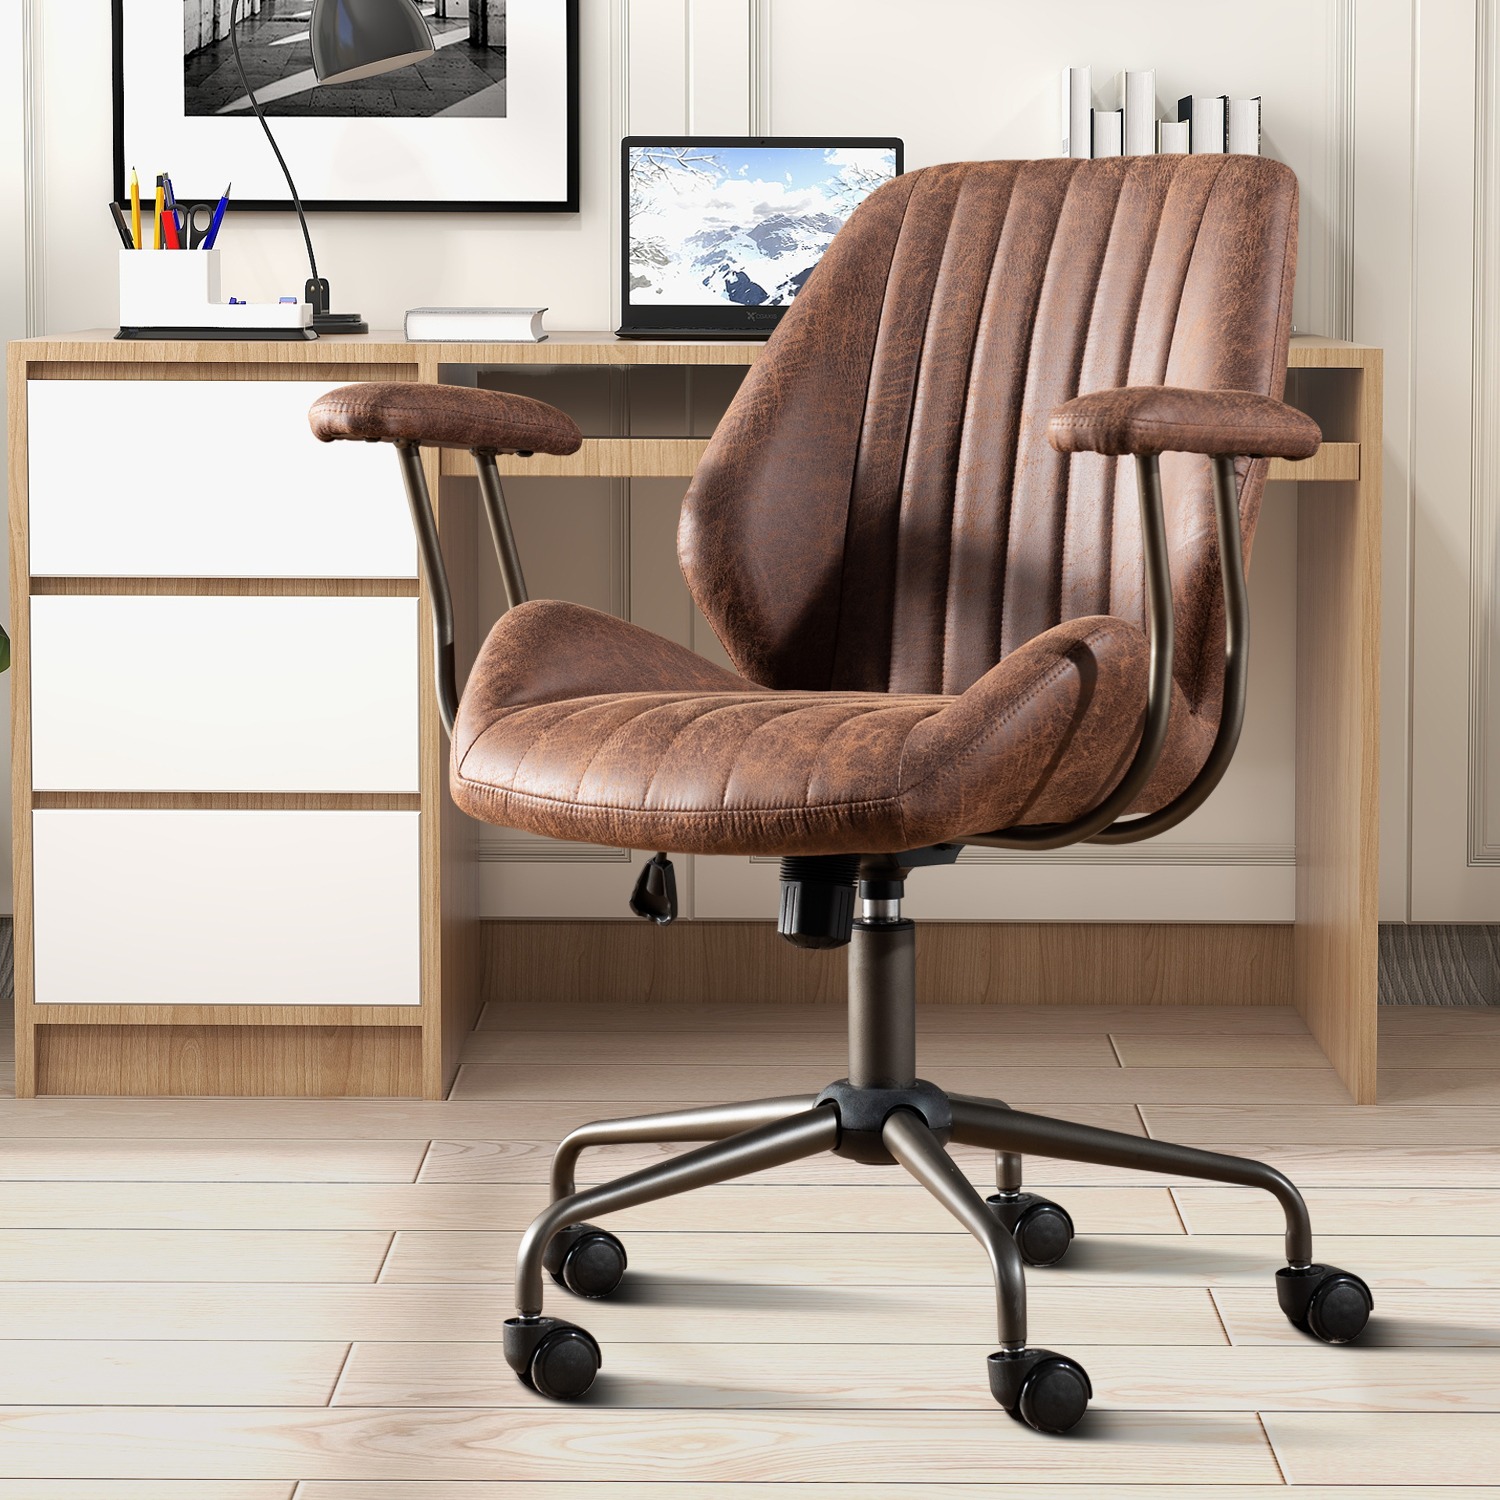 Ovios Ergonomic Office Chair Modern Computer Desk Suede Fabric Desk Chair with Lumbar Support for Home Office - image 1 of 8